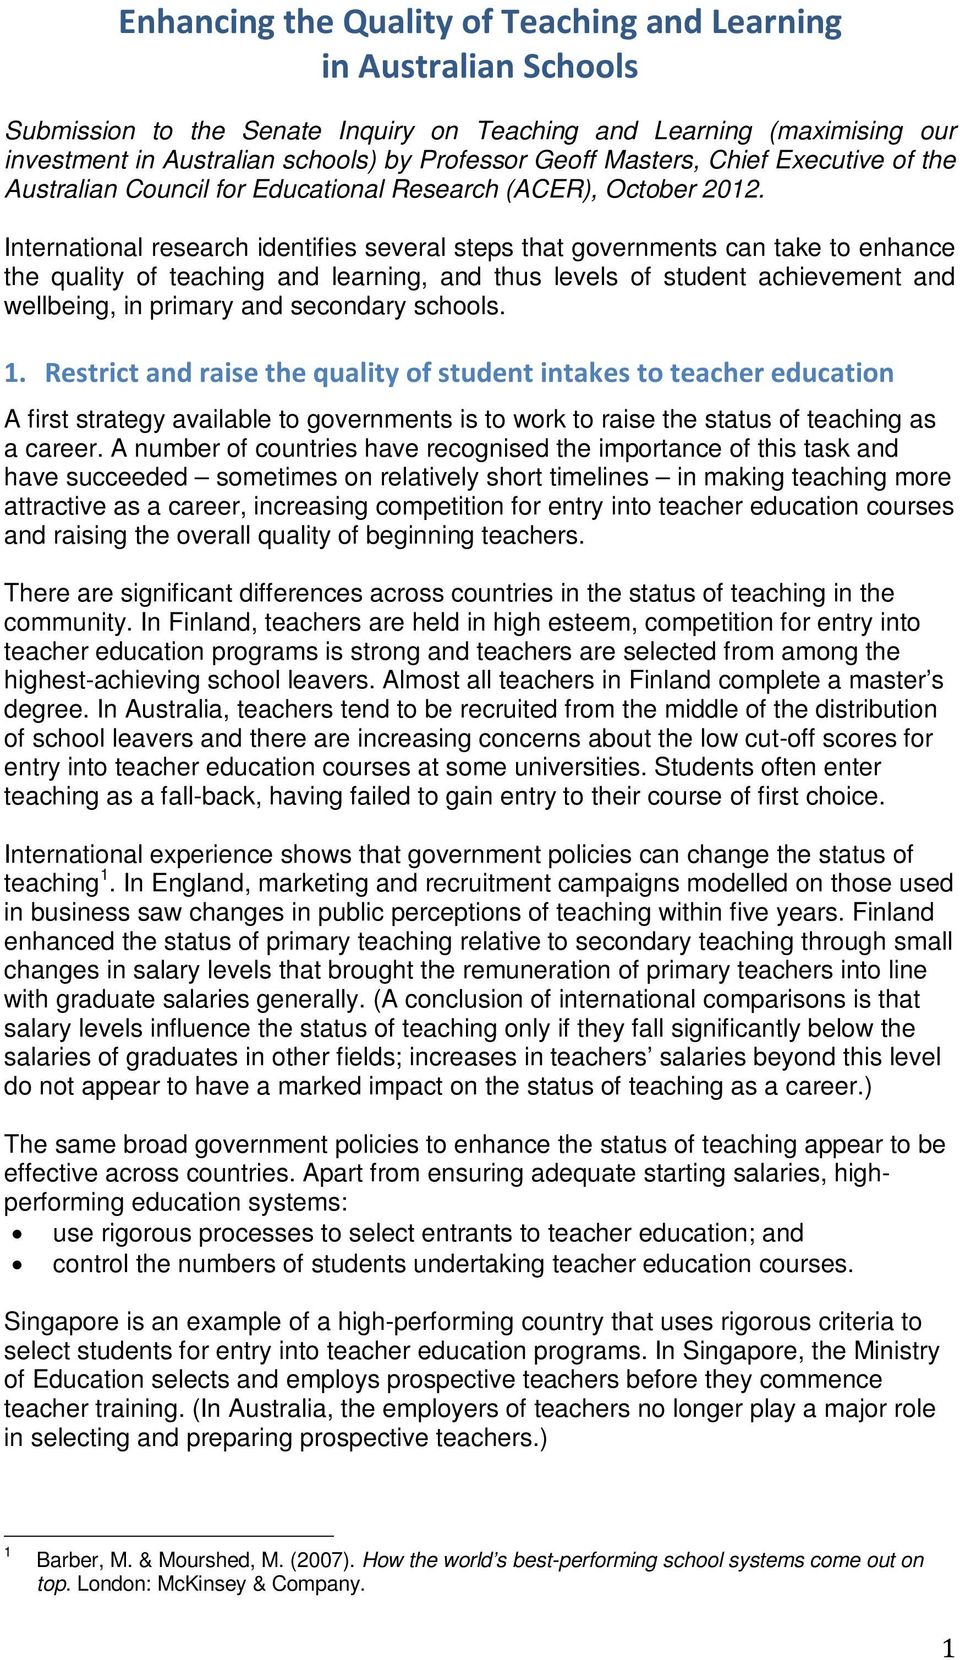 International research identifies several steps that governments can take to enhance the quality of teaching and learning, and thus levels of student achievement and wellbeing, in primary and